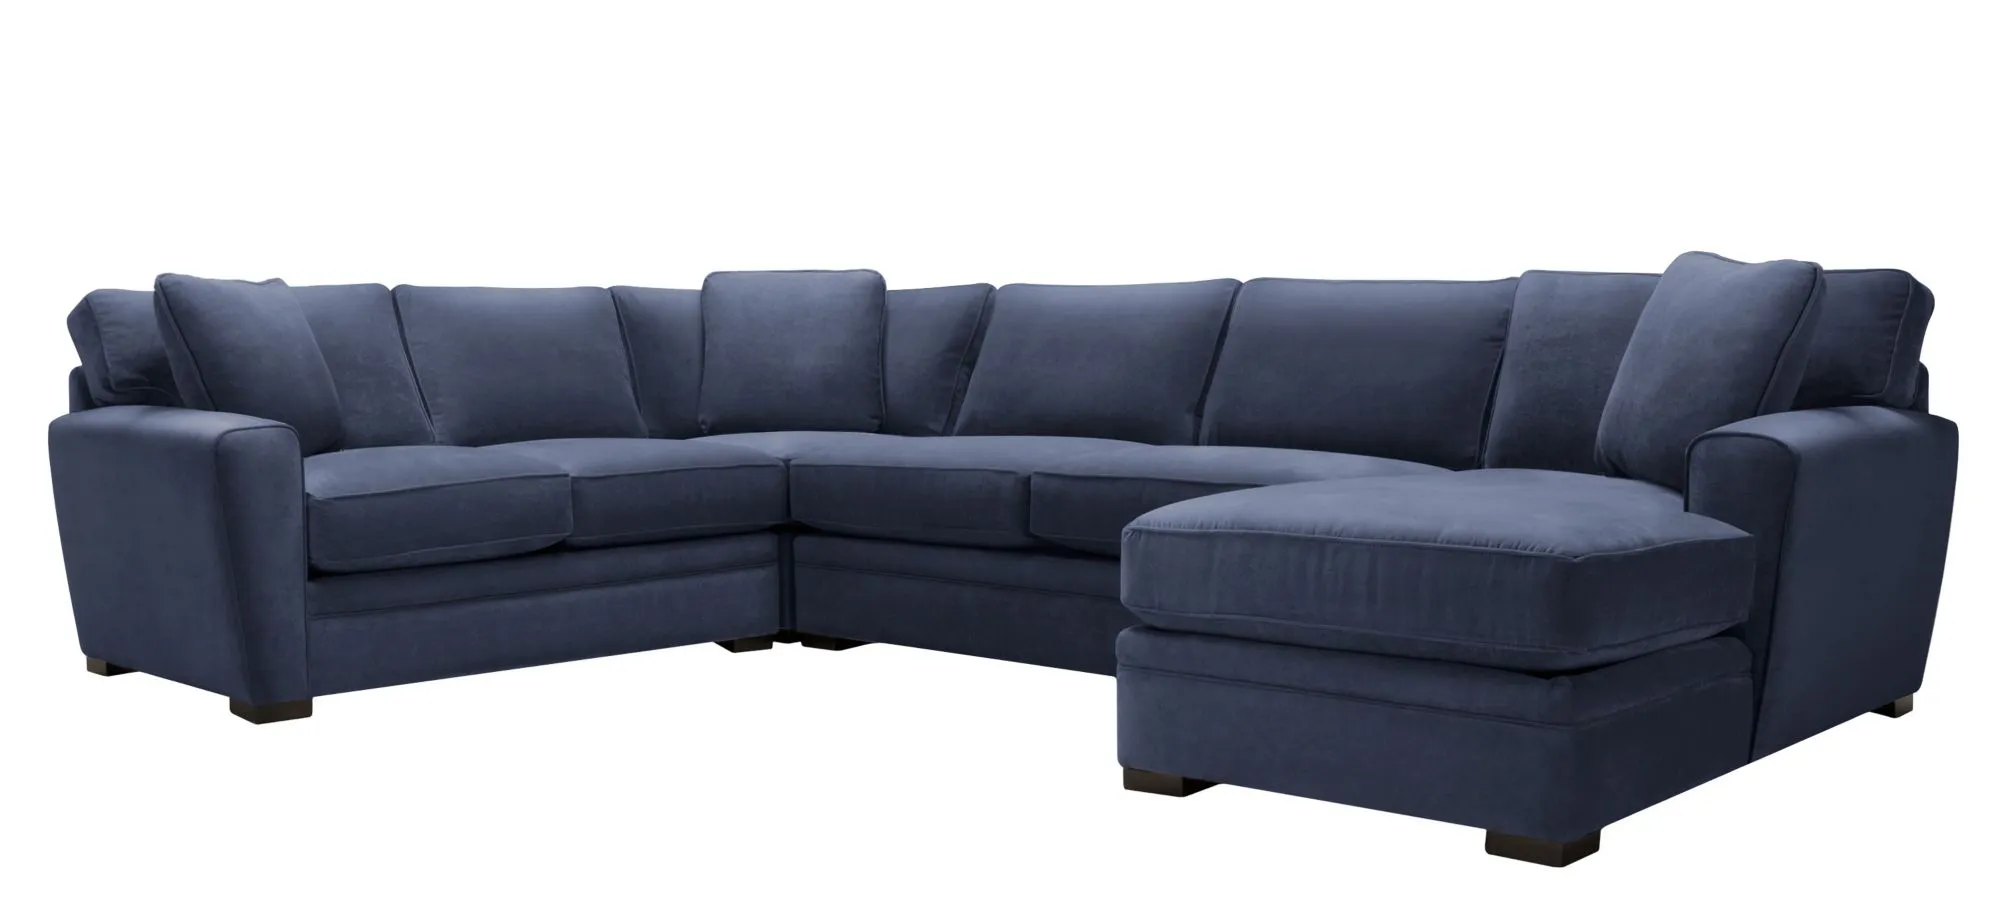 Artemis II 4-pc. Right Hand Facing Sectional Sofa in Gypsy Navy by Jonathan Louis